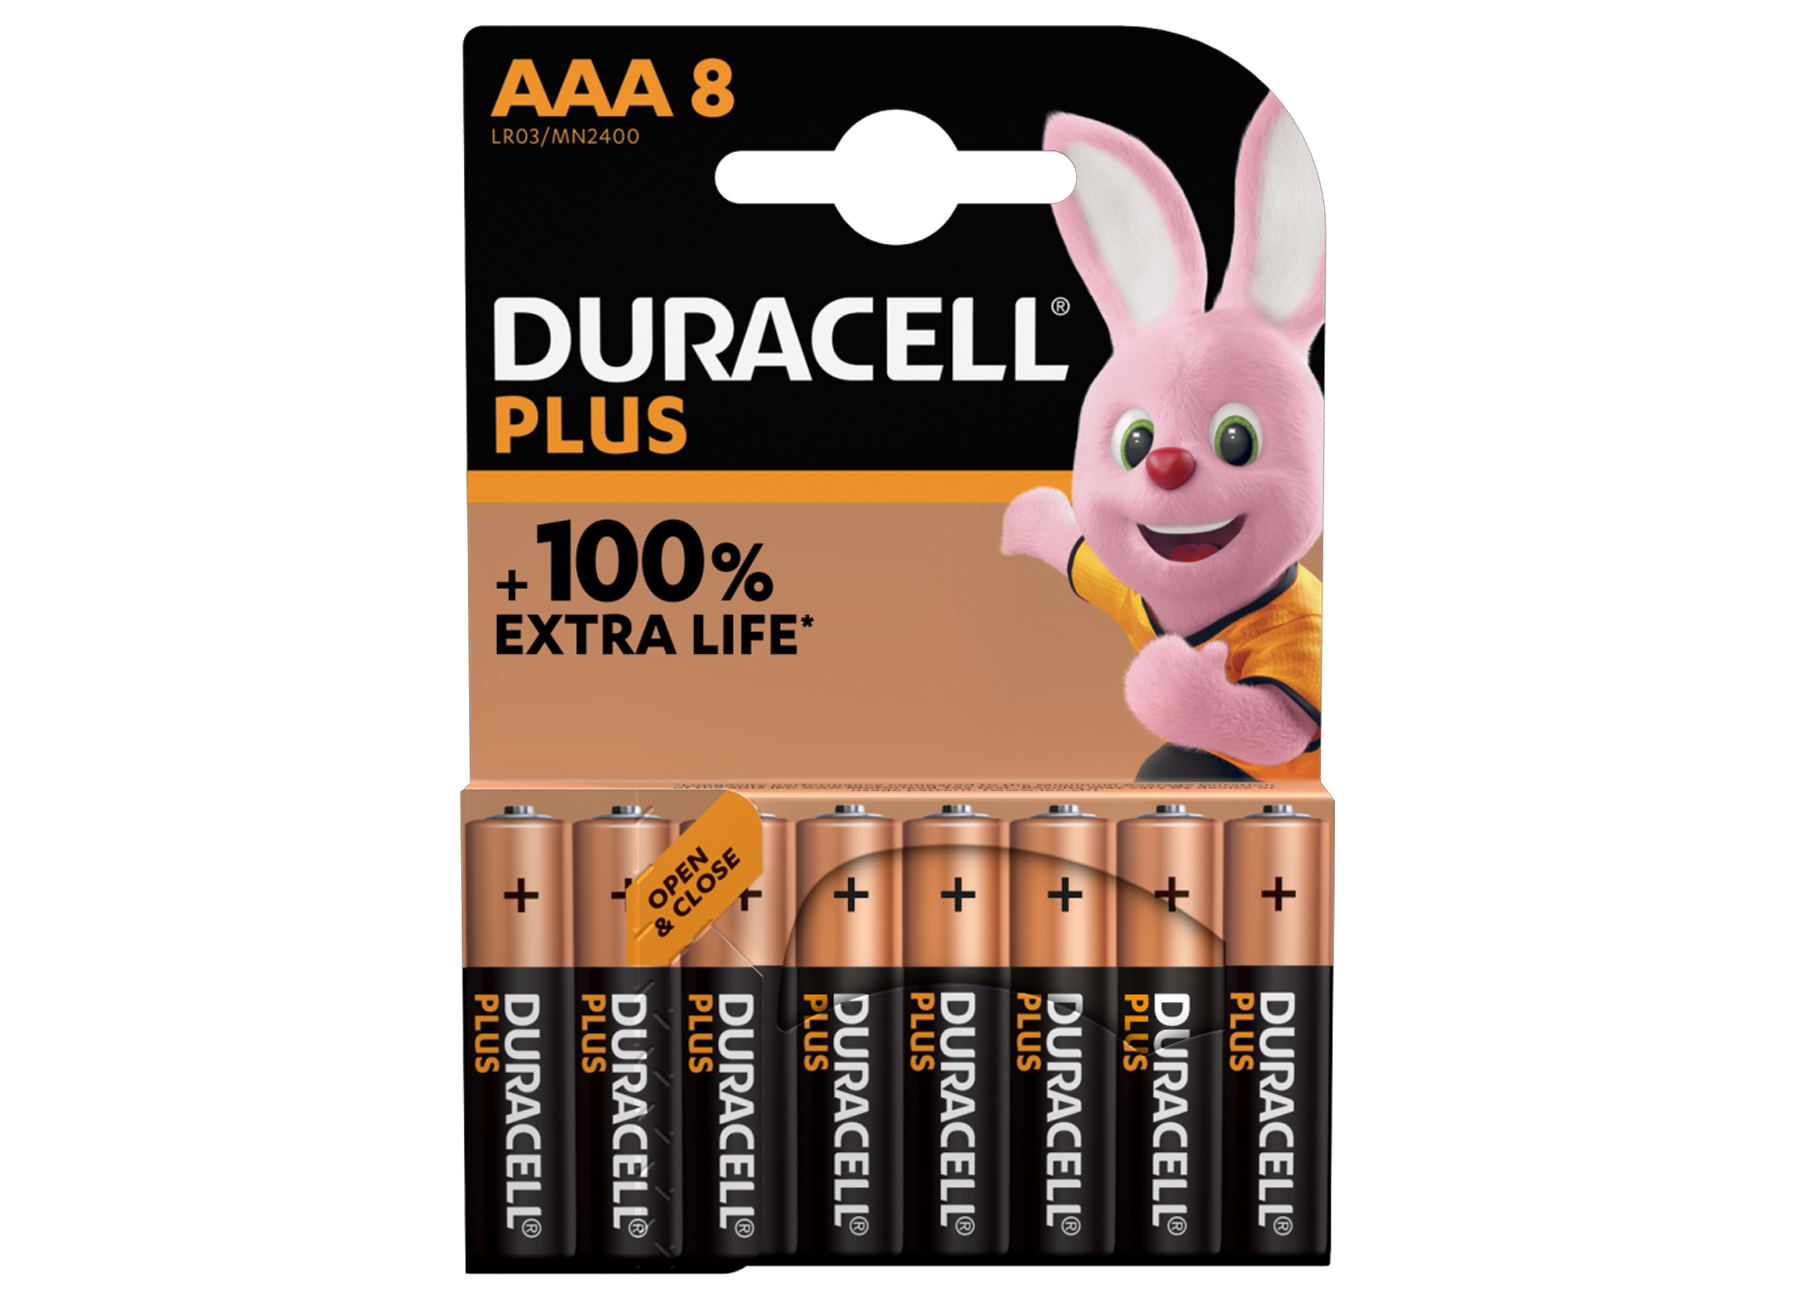 DURACELL PLUS POWER AAA MN2400 LR03 8 PACK